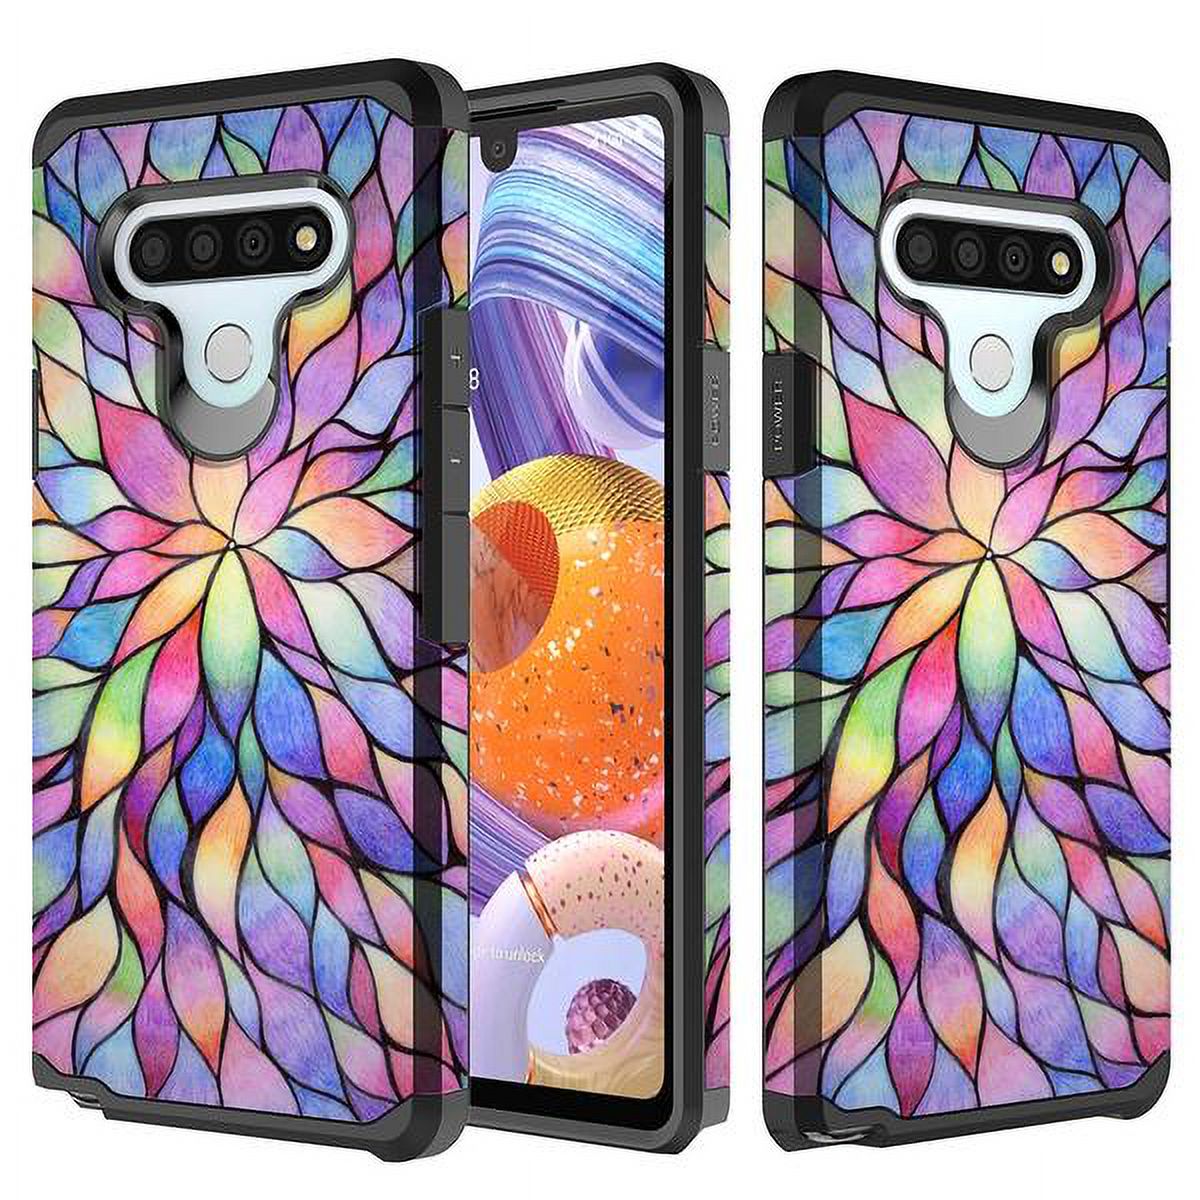 LG Stylo 6/LG Stylo 6 Plus Case Cover w/[ Temper Glass Screen Protector] Silicone Shock Proof Dual Layer Cute Girls Women Case Cover for LG Stylo 6/Stylo 6 Plus - Rainbow Flower - image 2 of 5